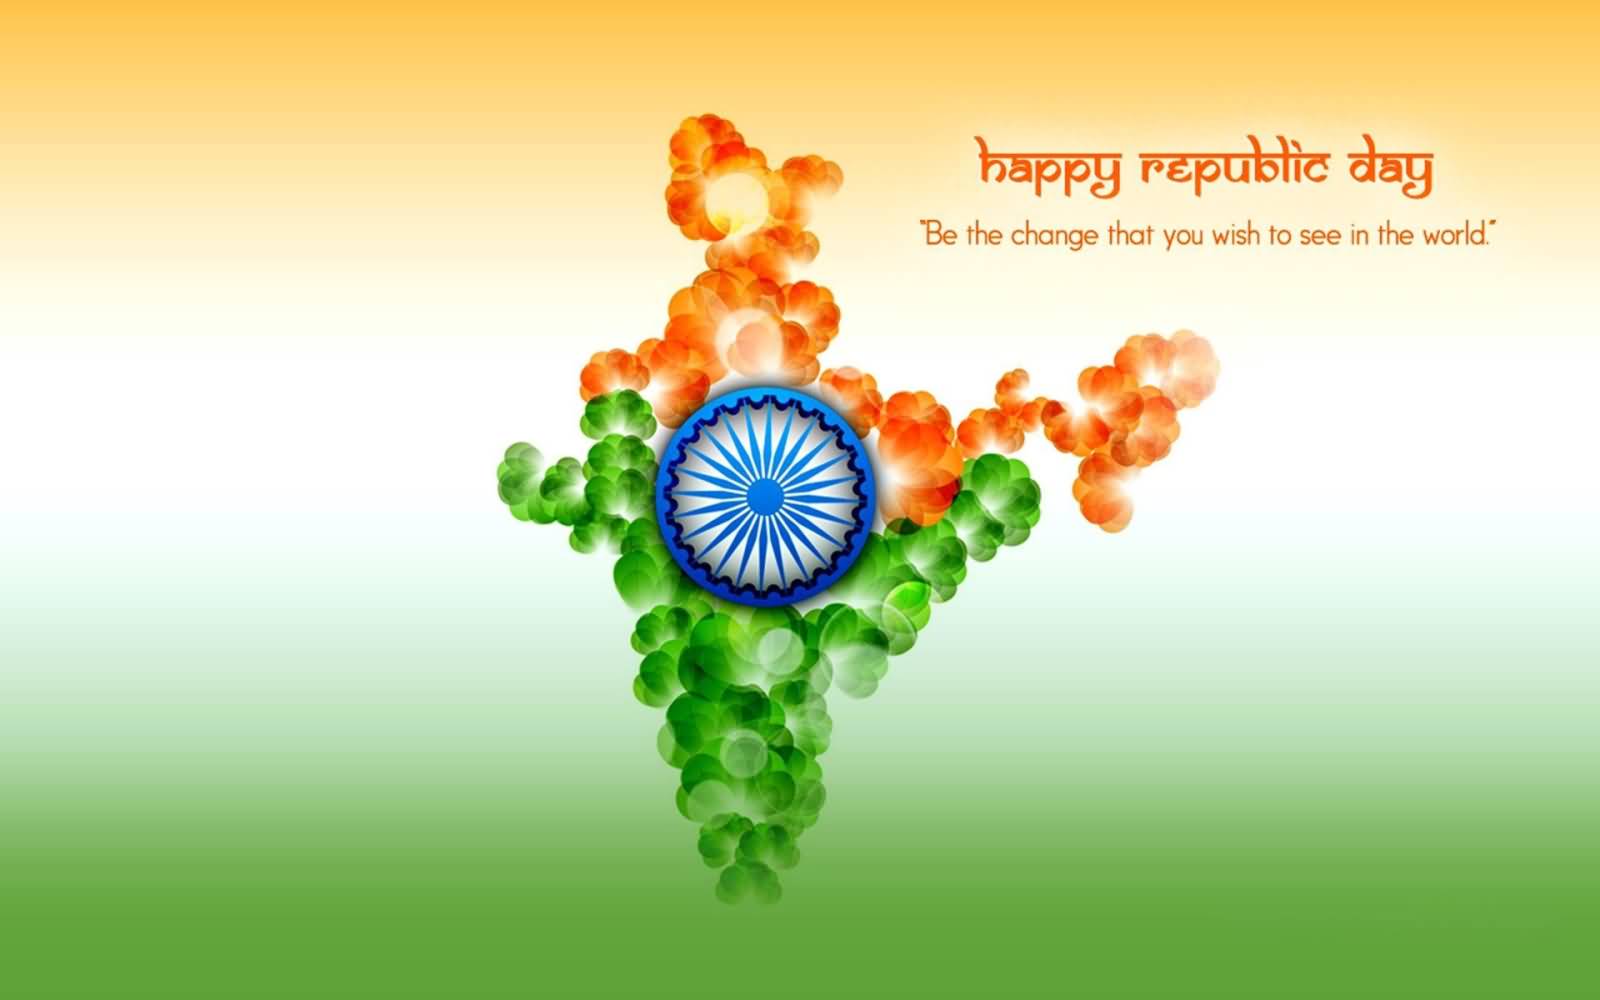 60 Best Republic Day India 2017 Wish Pictures